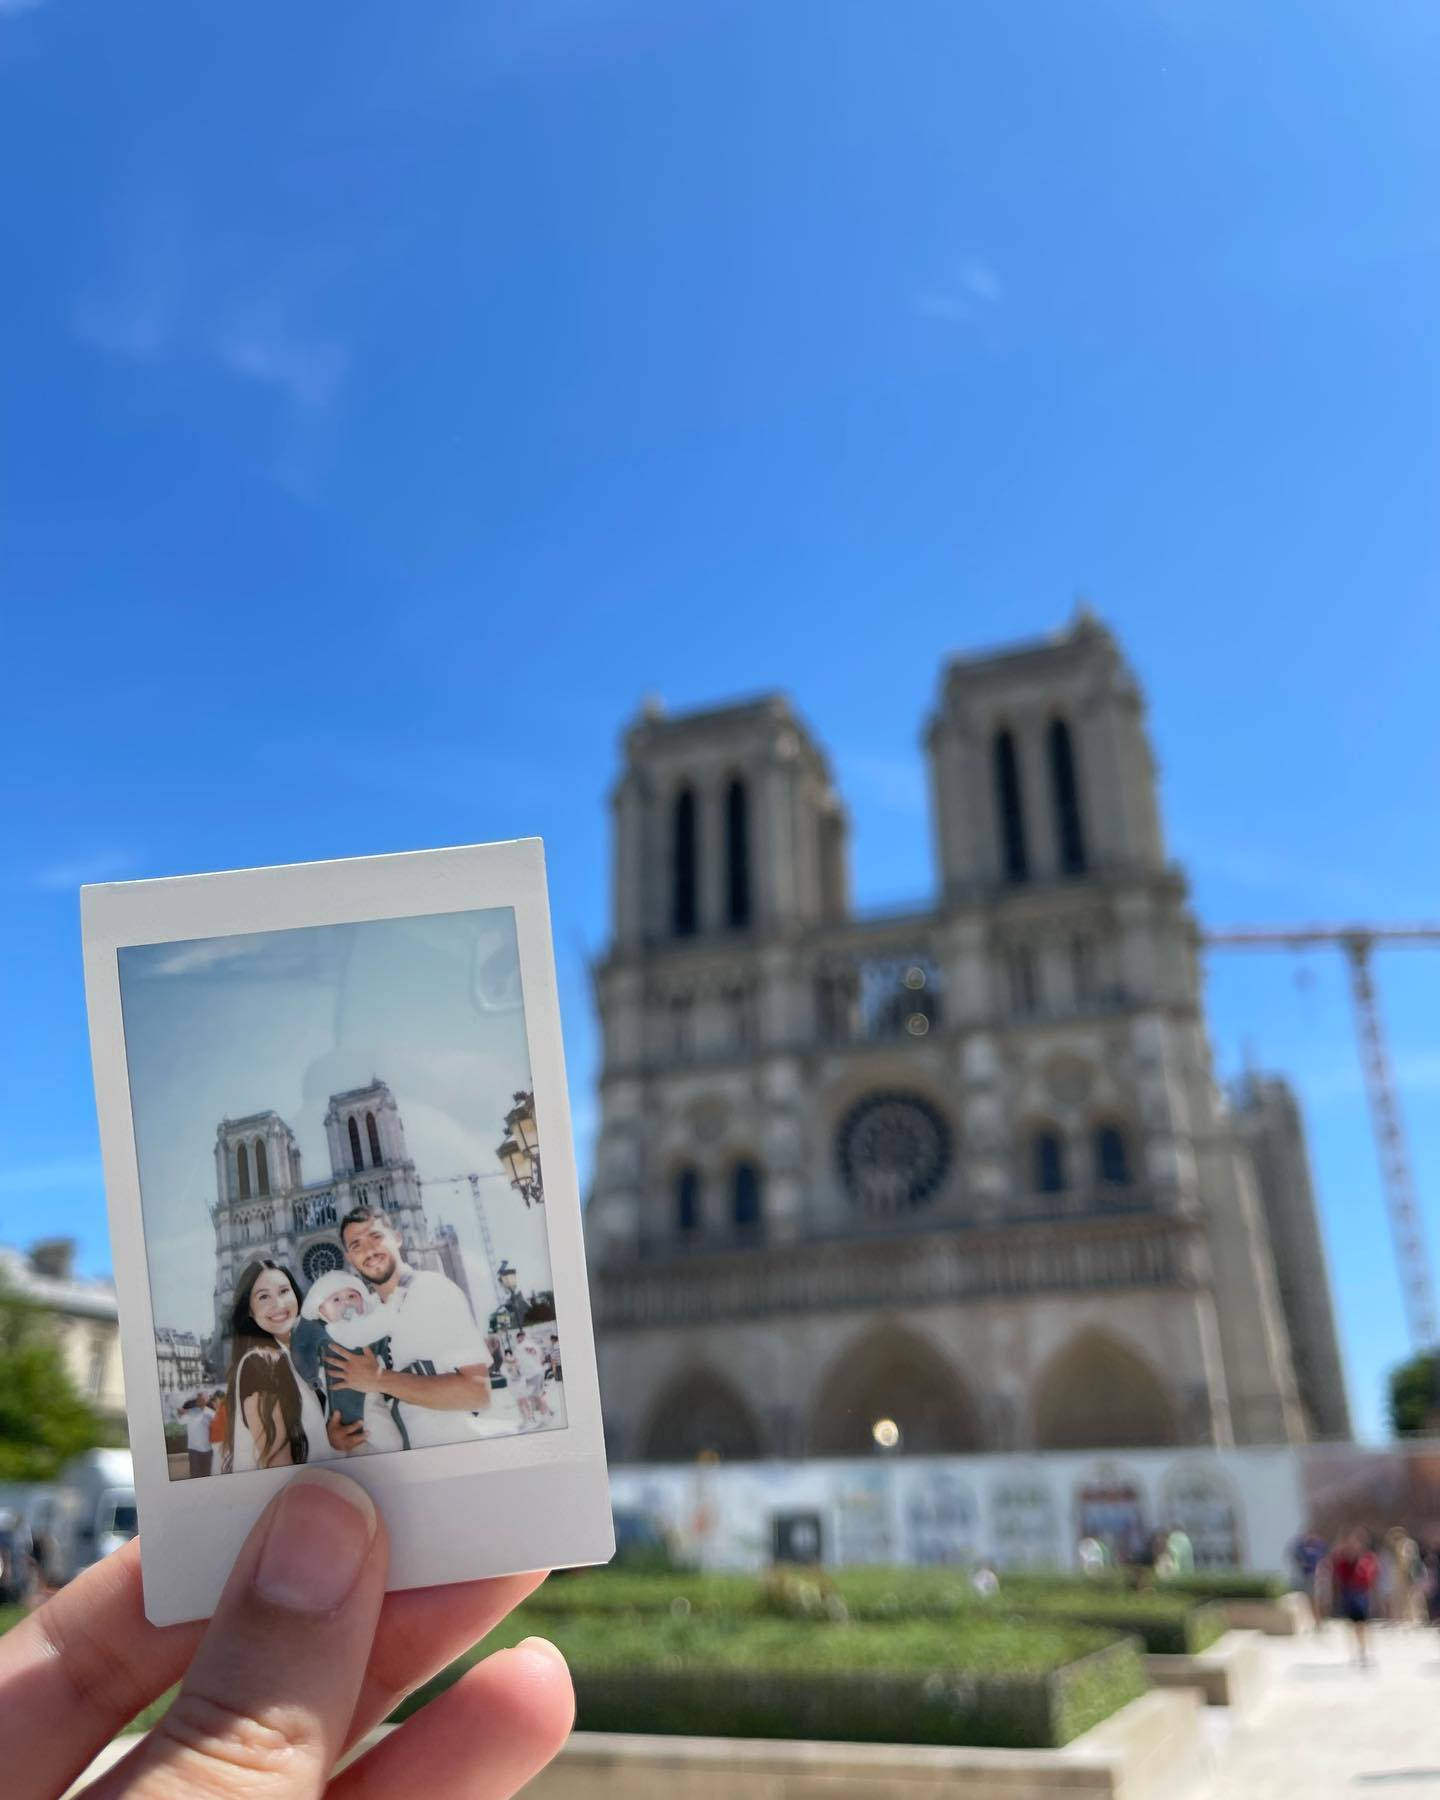 Pablofornals Notre Dame Can Be Translated To 